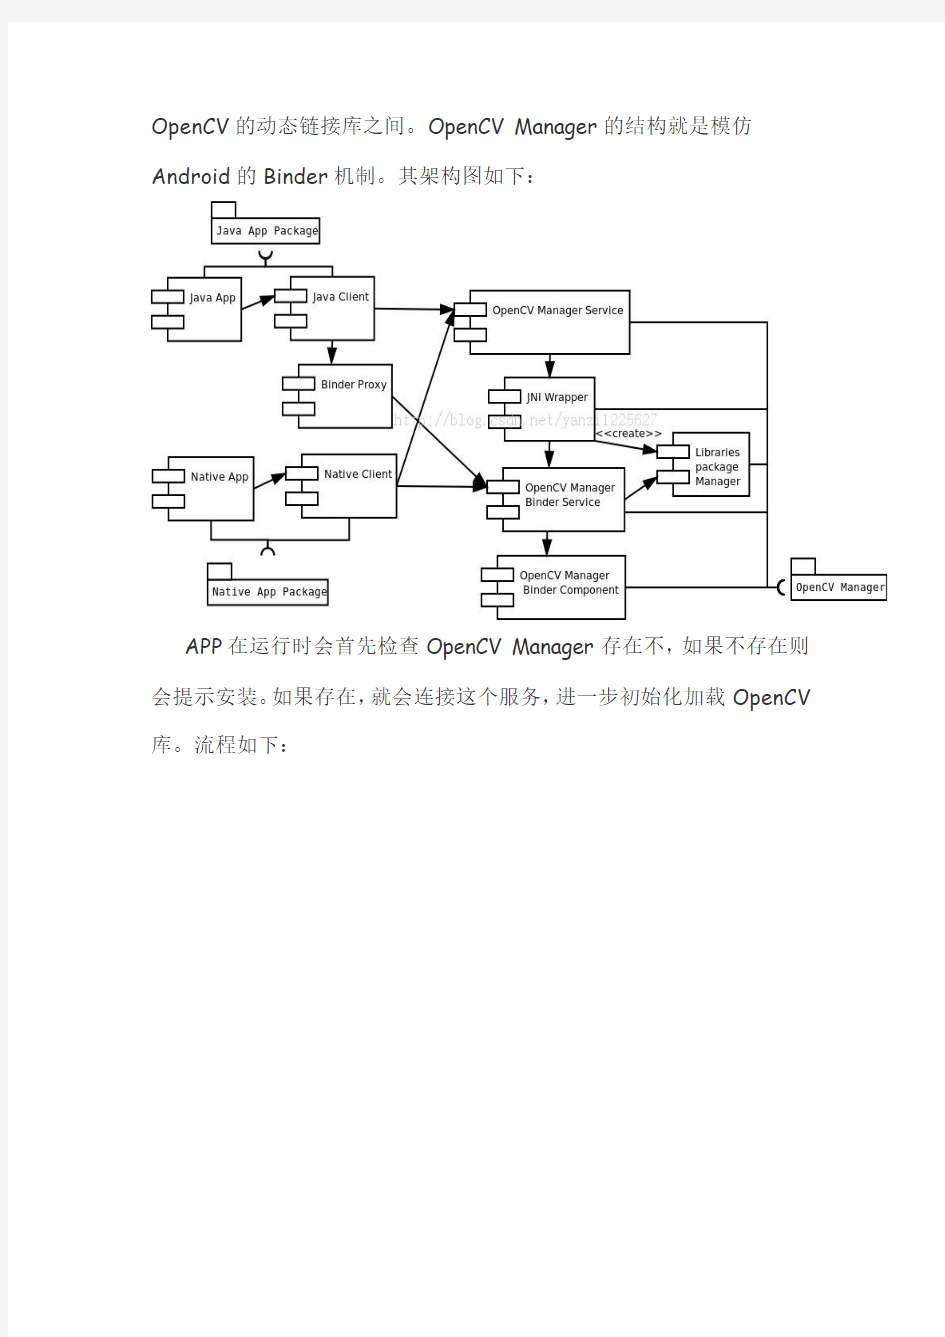 OpenCV4Android开发环境搭建